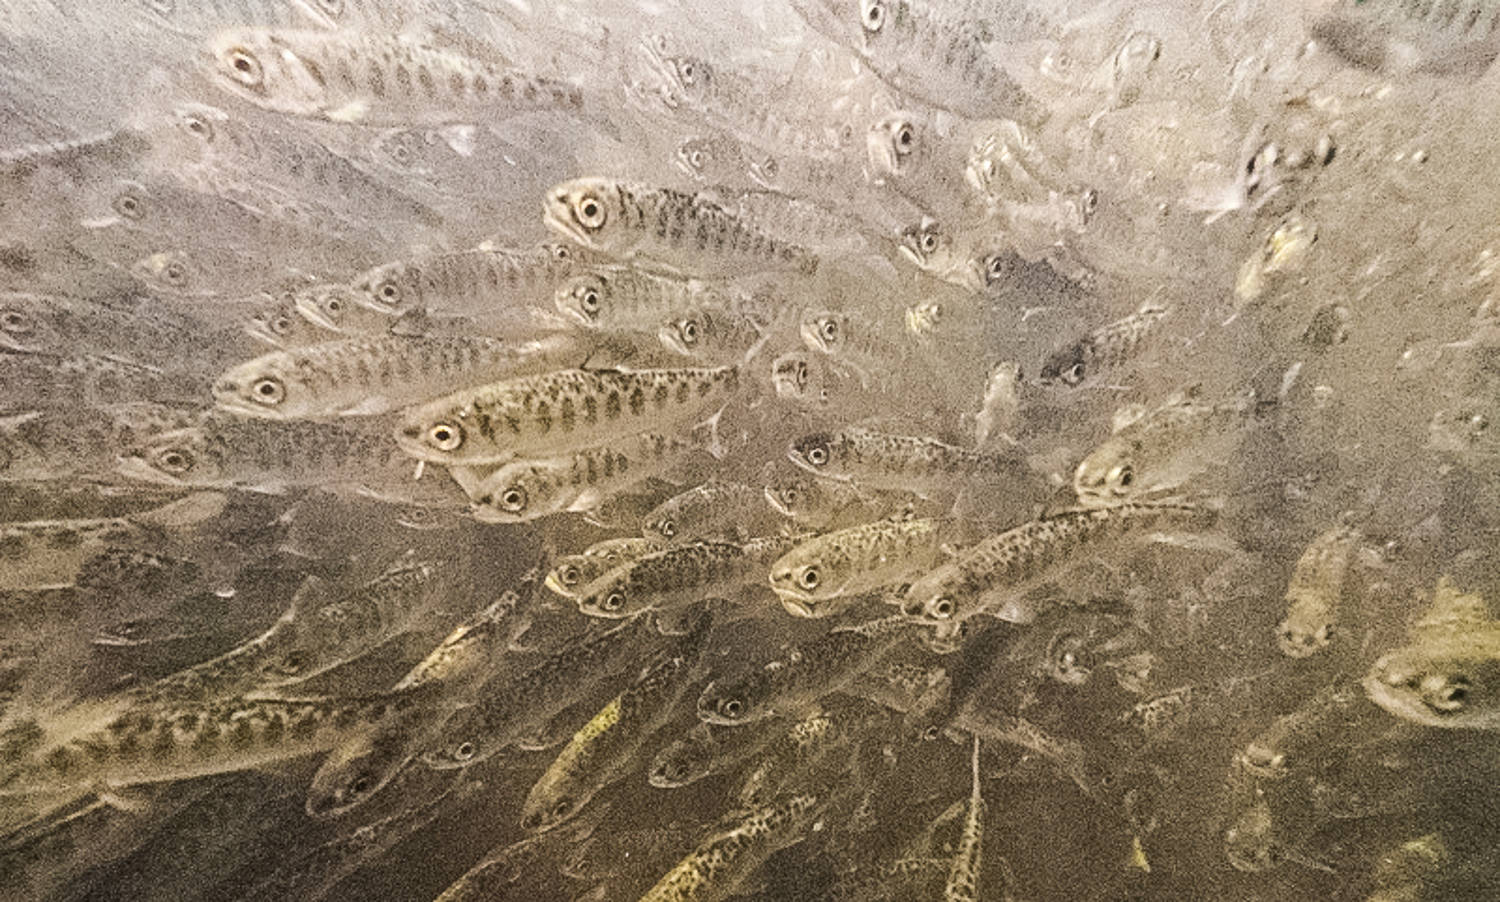 Large number of 830,000 salmon fry die after released into California river